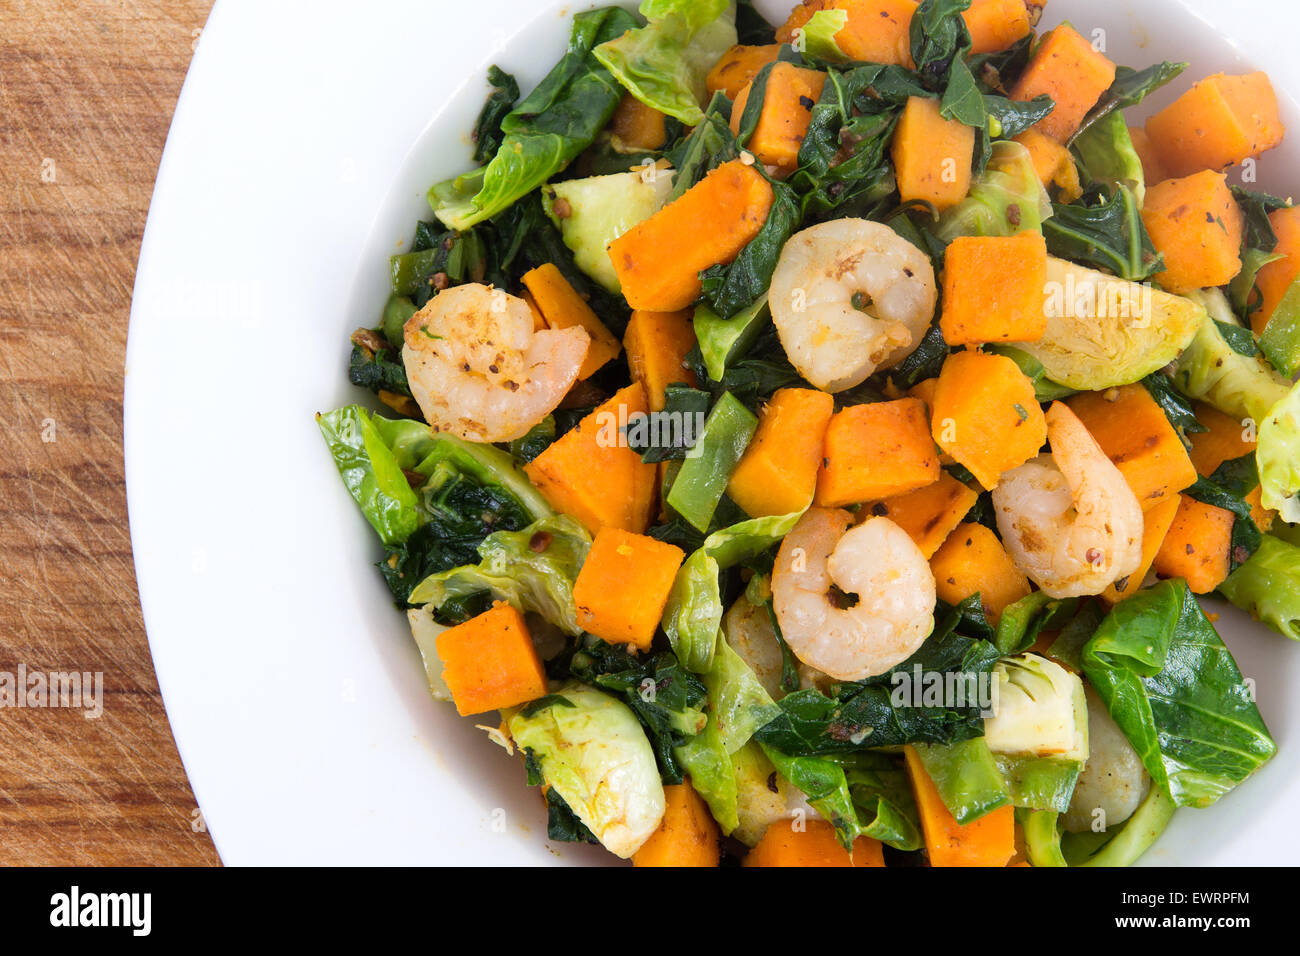 Sweet potato casserole with greens and shrimps Stock Photo